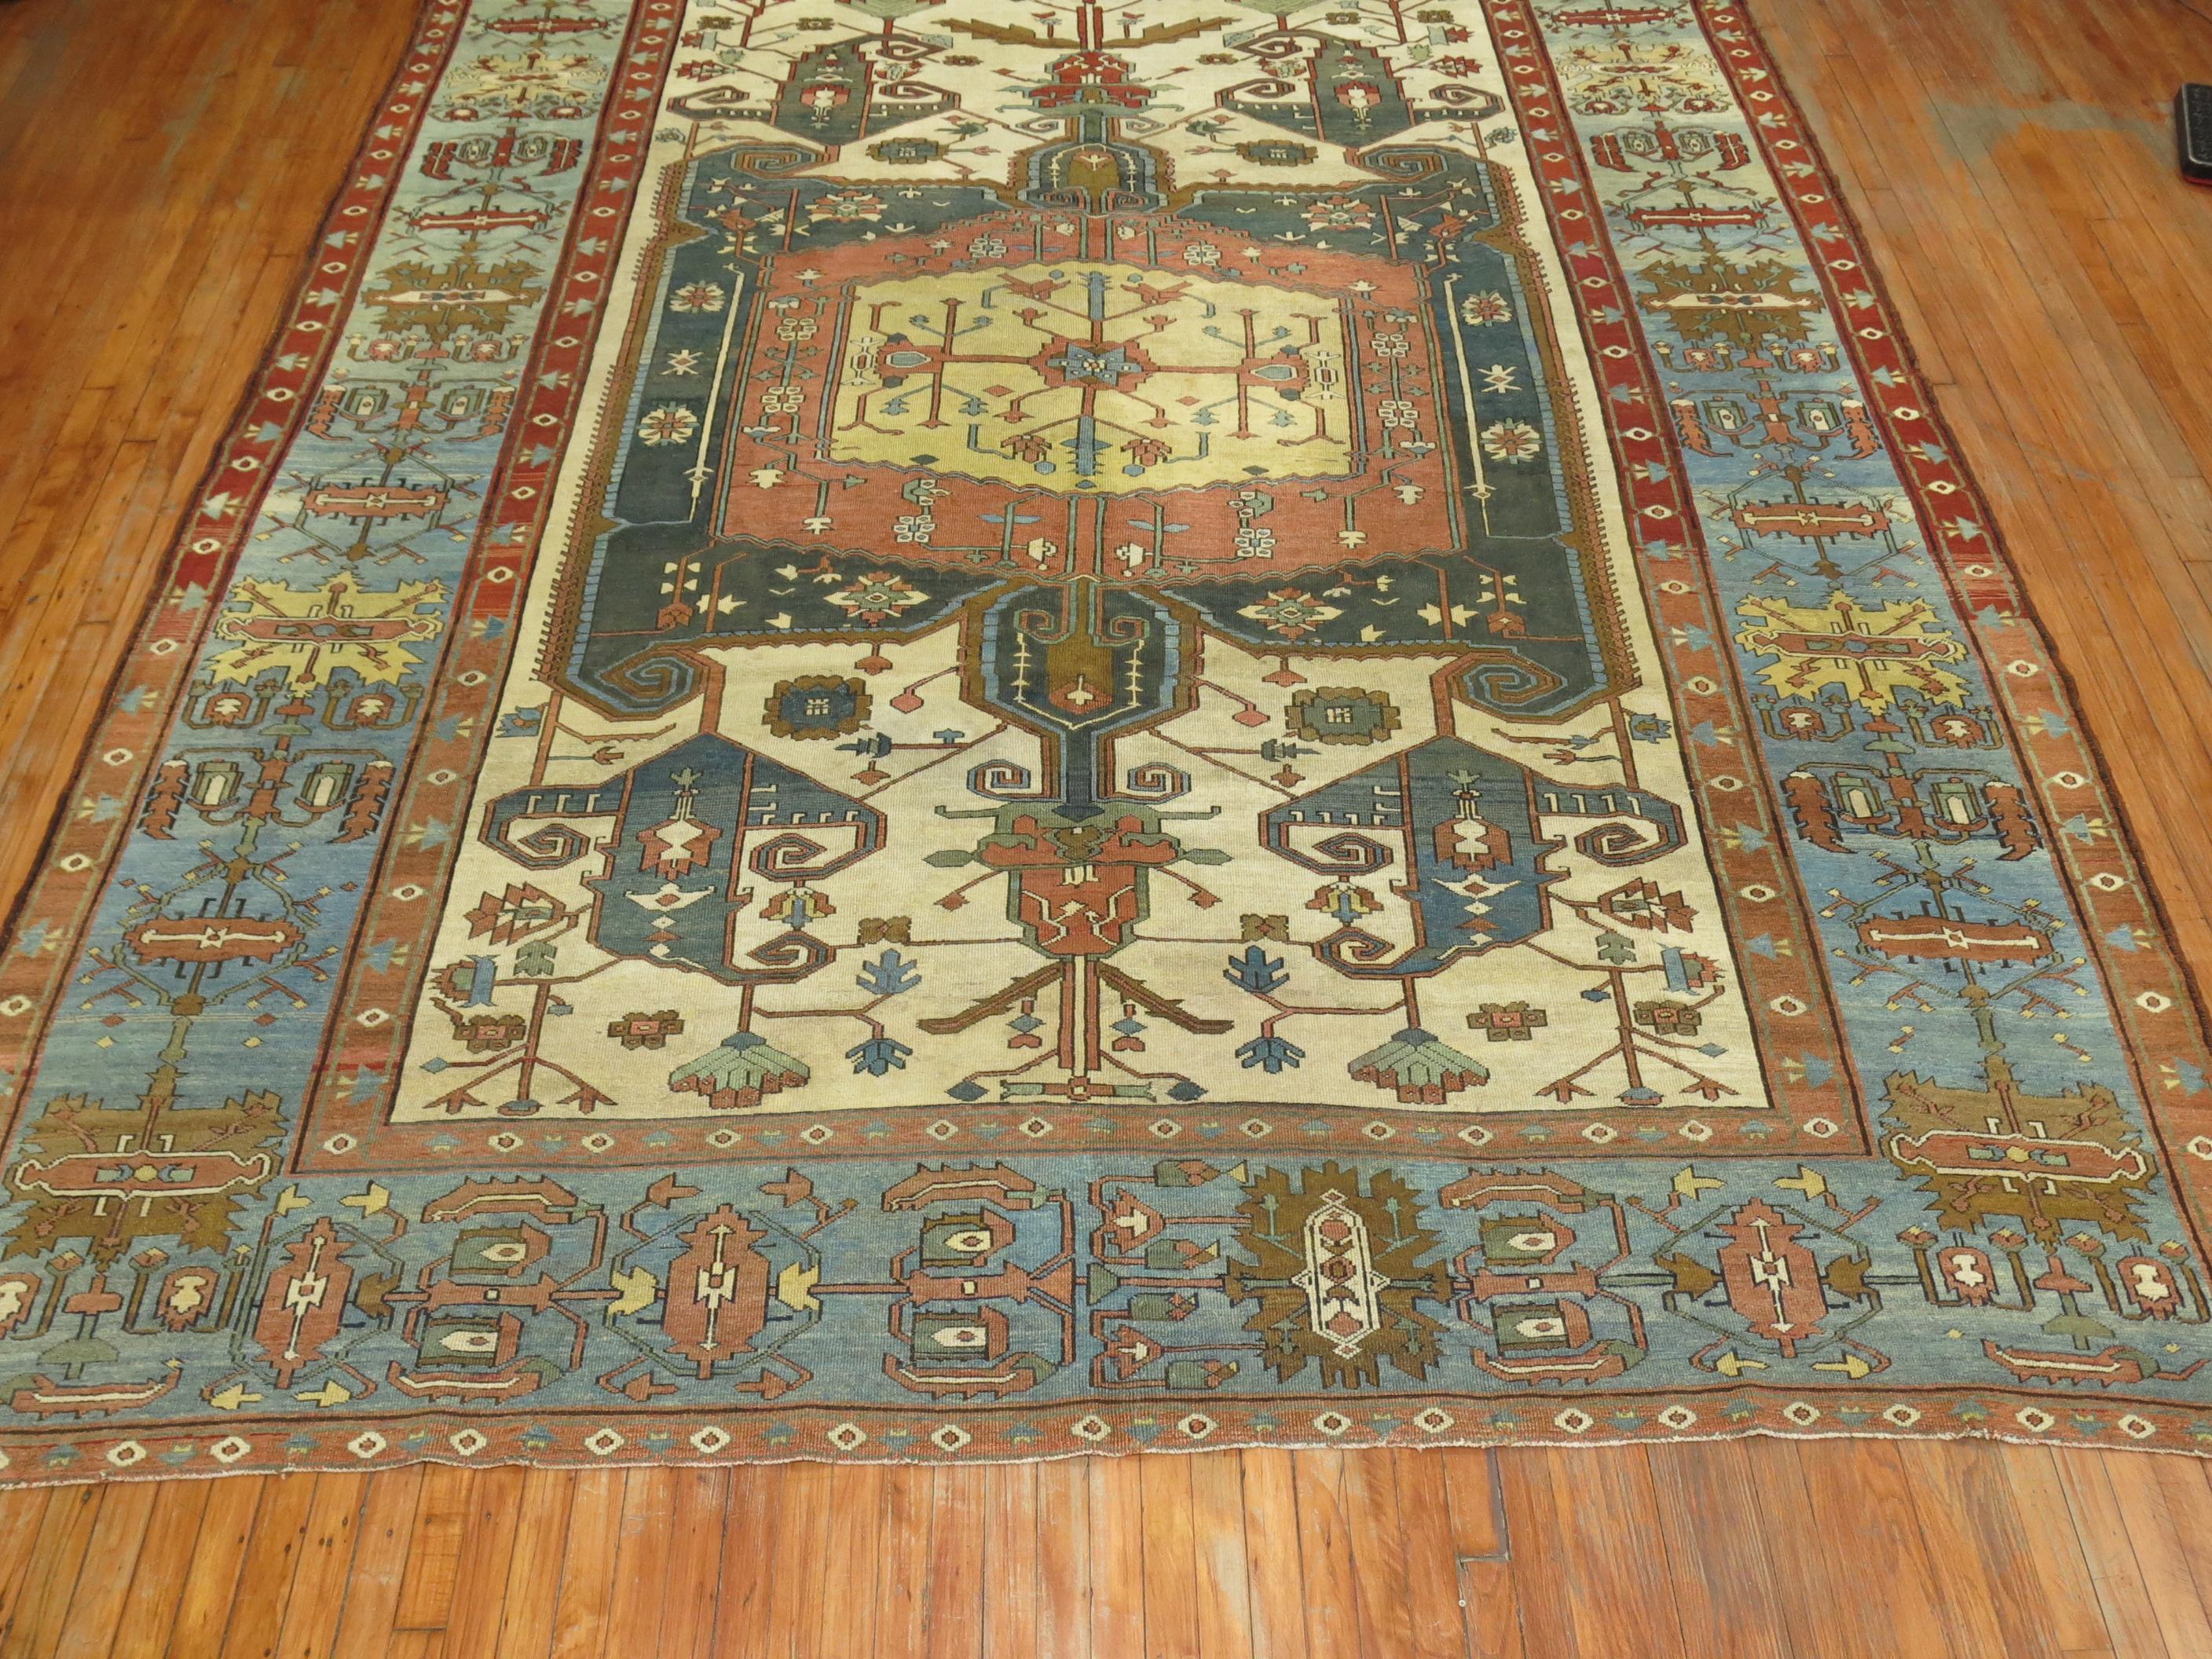 An early 20th century dramatic Masculine and colorful Persian Heriz Serapi carpet.

Heriz carpets are beloved for their versatility. Their geometry complements modern furnishings and their warm colors and artistic depth enhances antiques of all